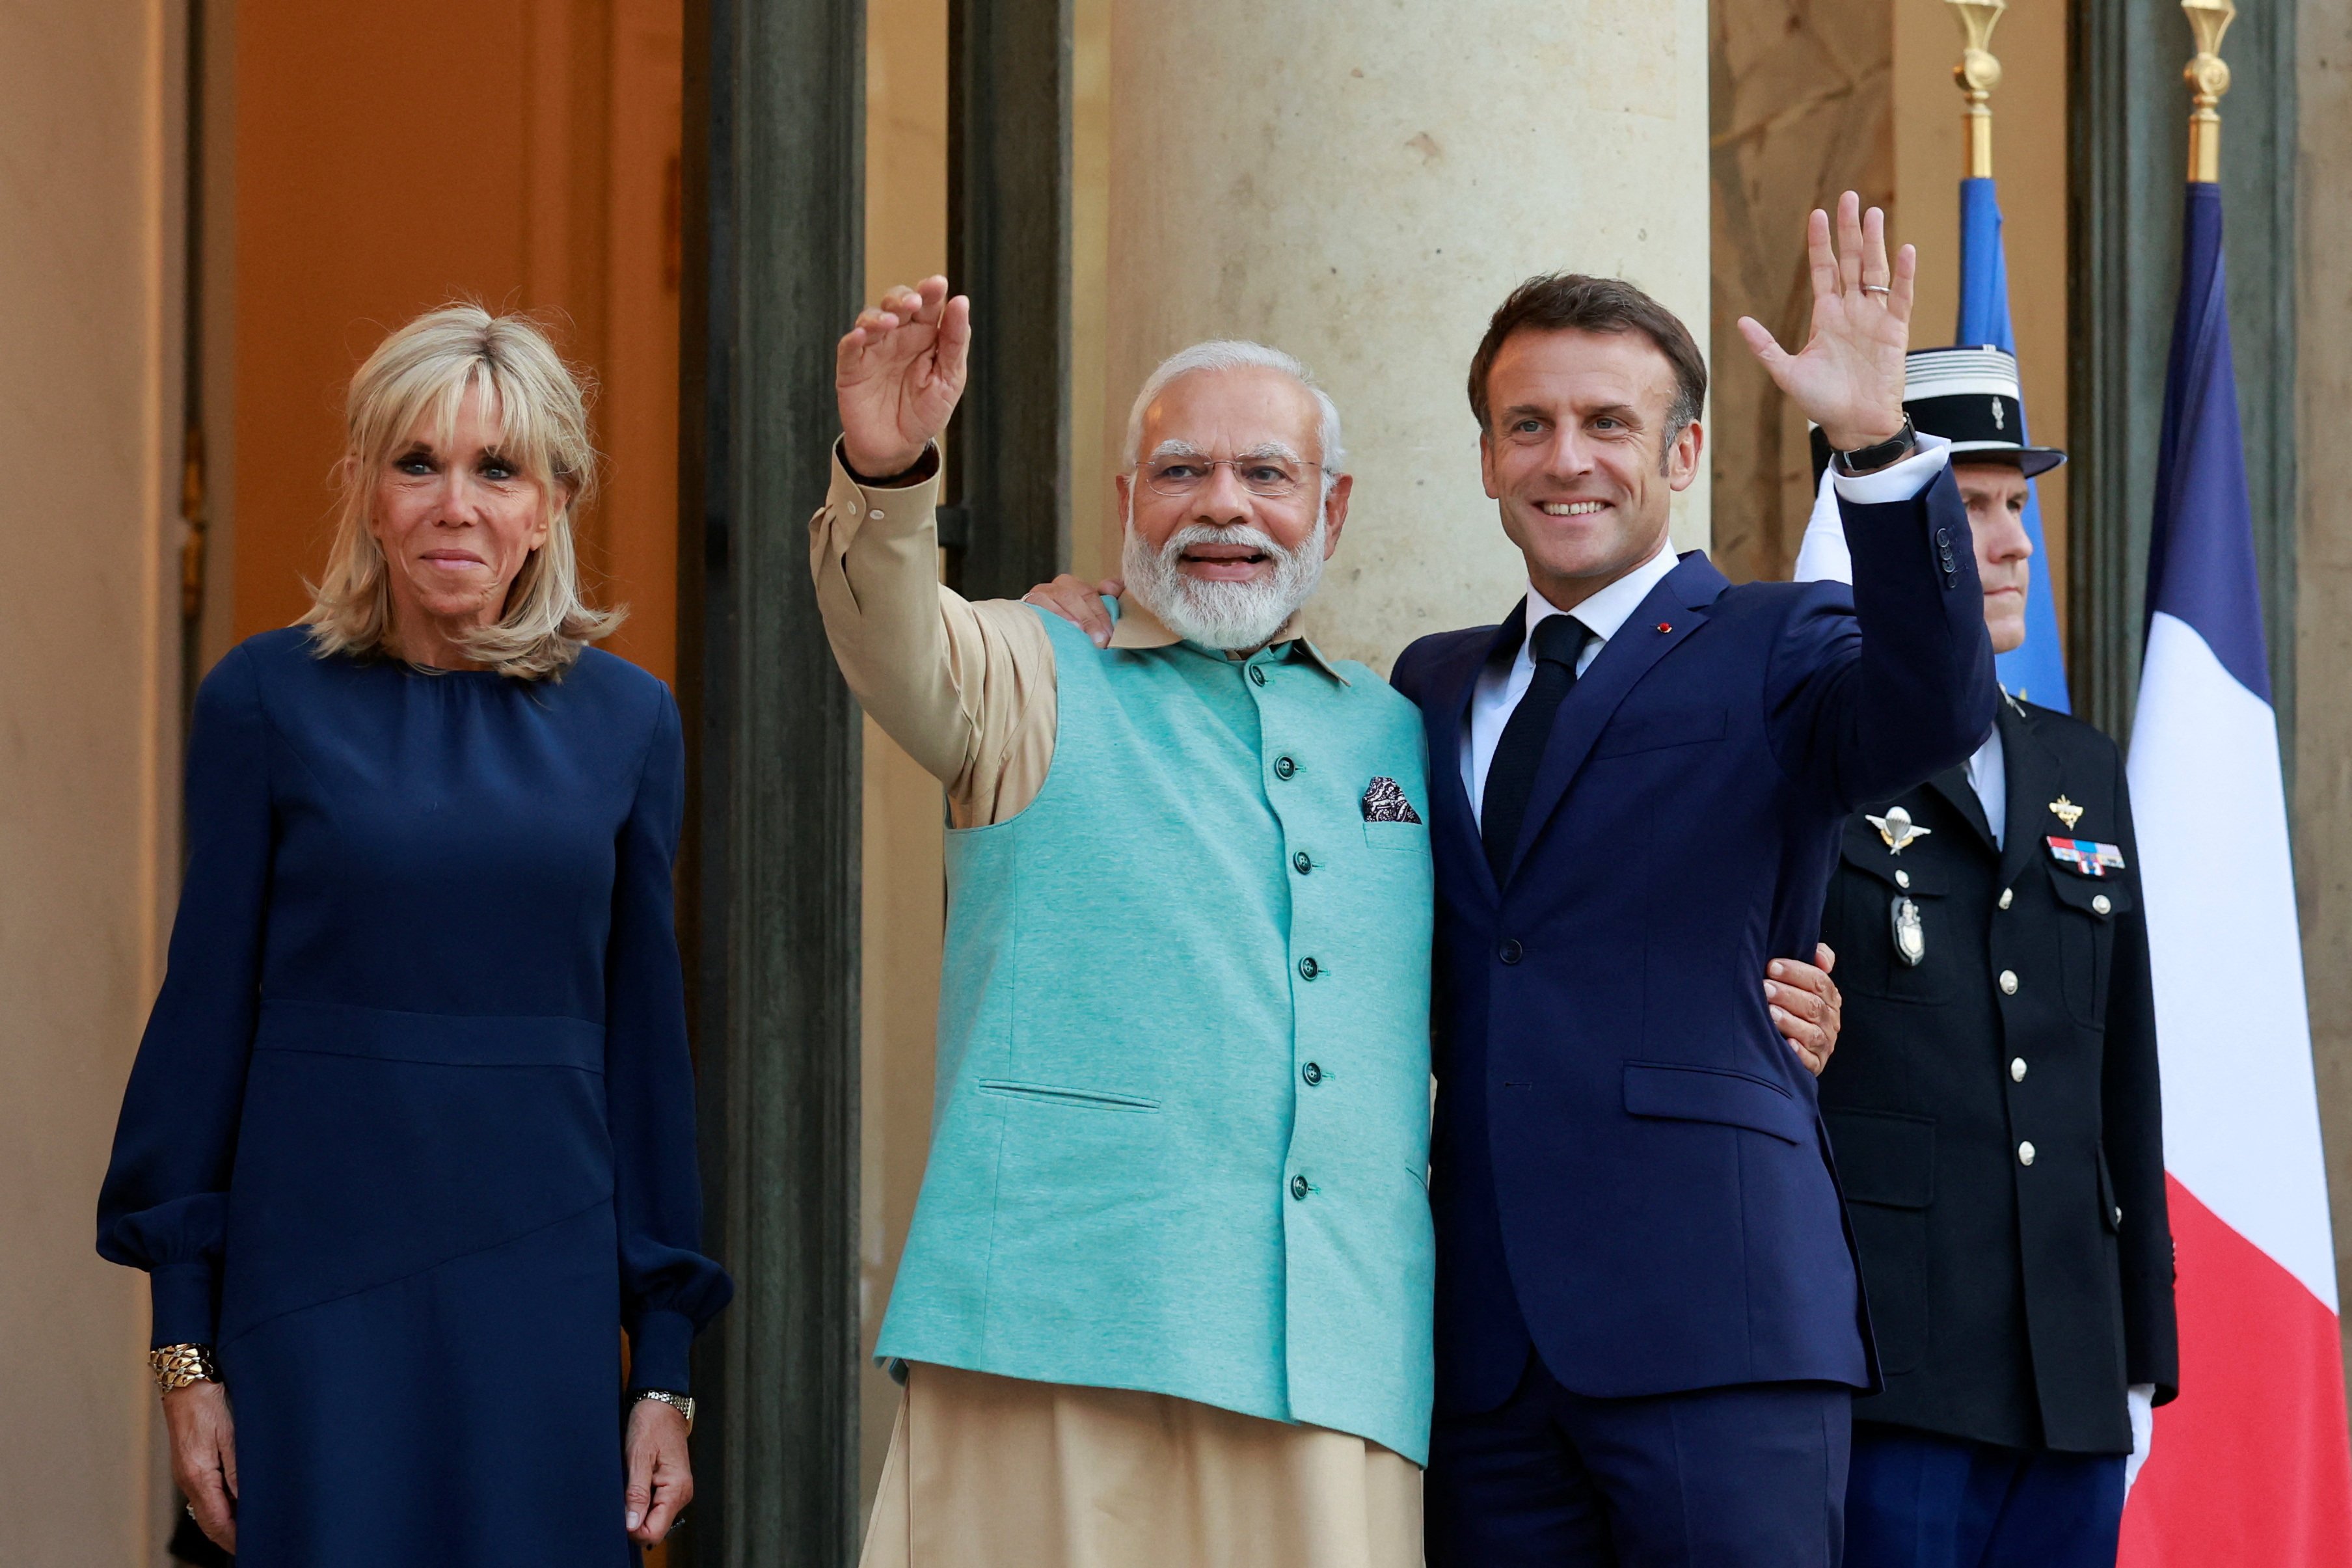 French President Emmanuel Macron and his wife Brigitte Macron welcome Indian Prime Minister Narendra Modi at the Elysee Palace, in Paris, France. Photo: Reuters